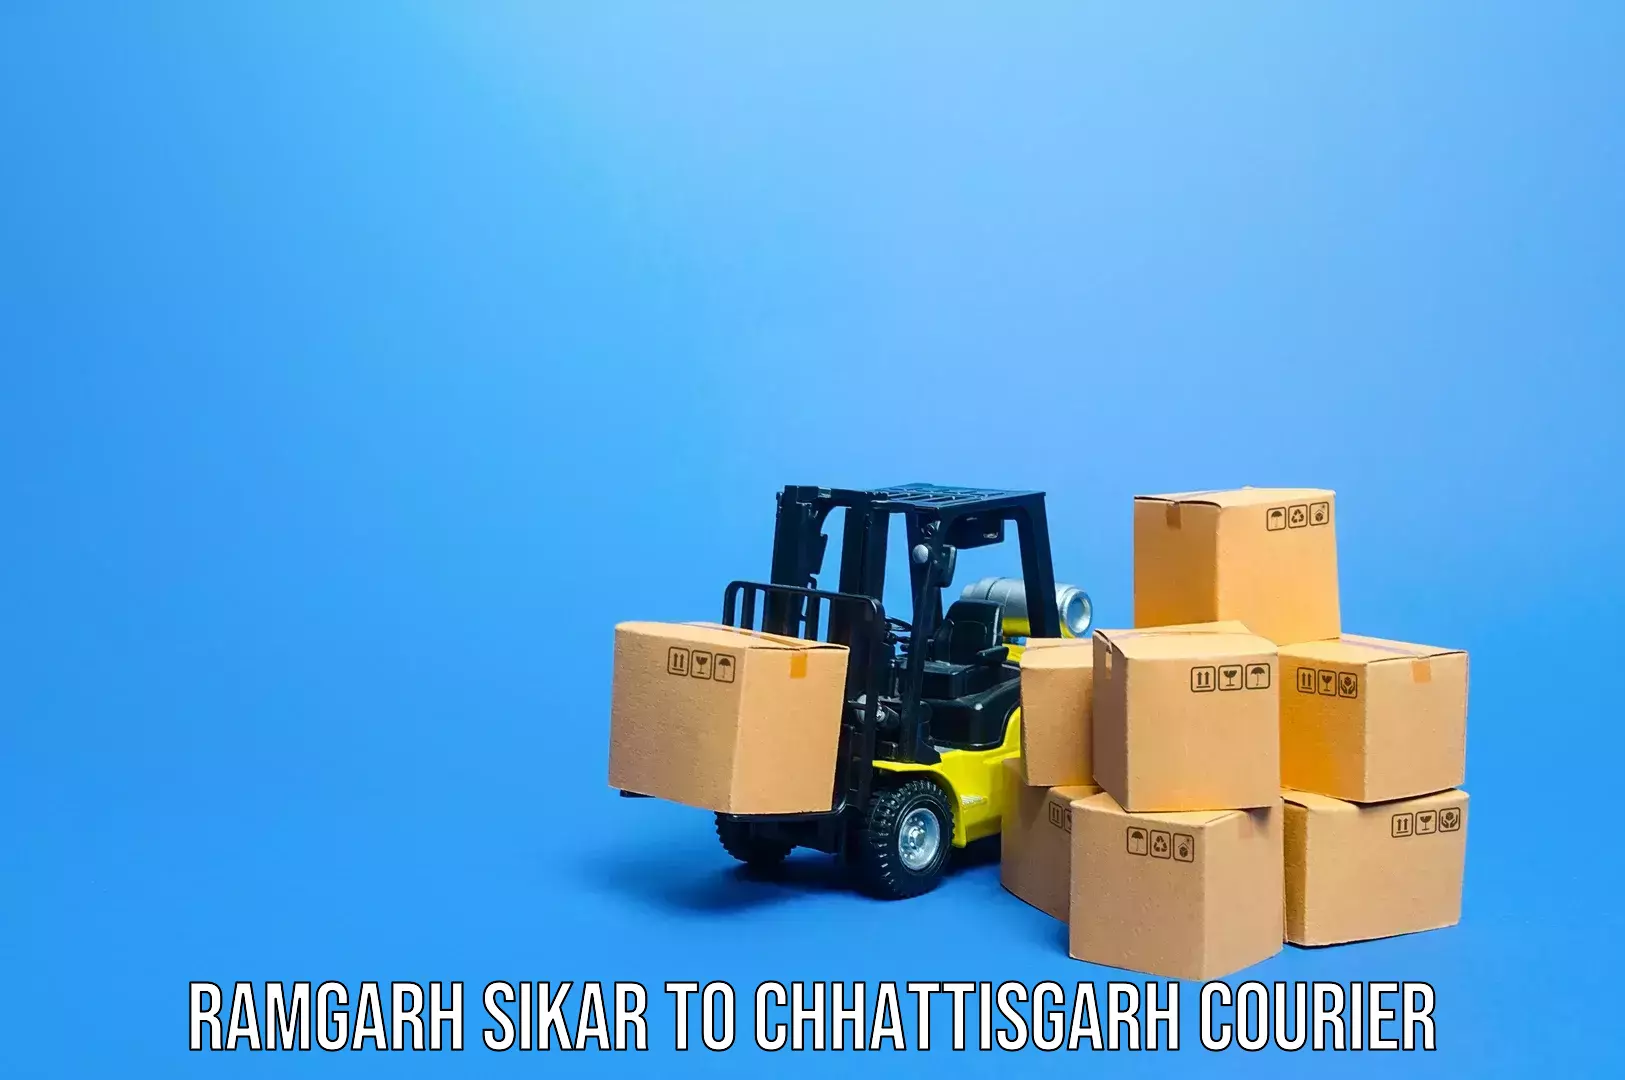 Baggage relocation service Ramgarh Sikar to Pendra